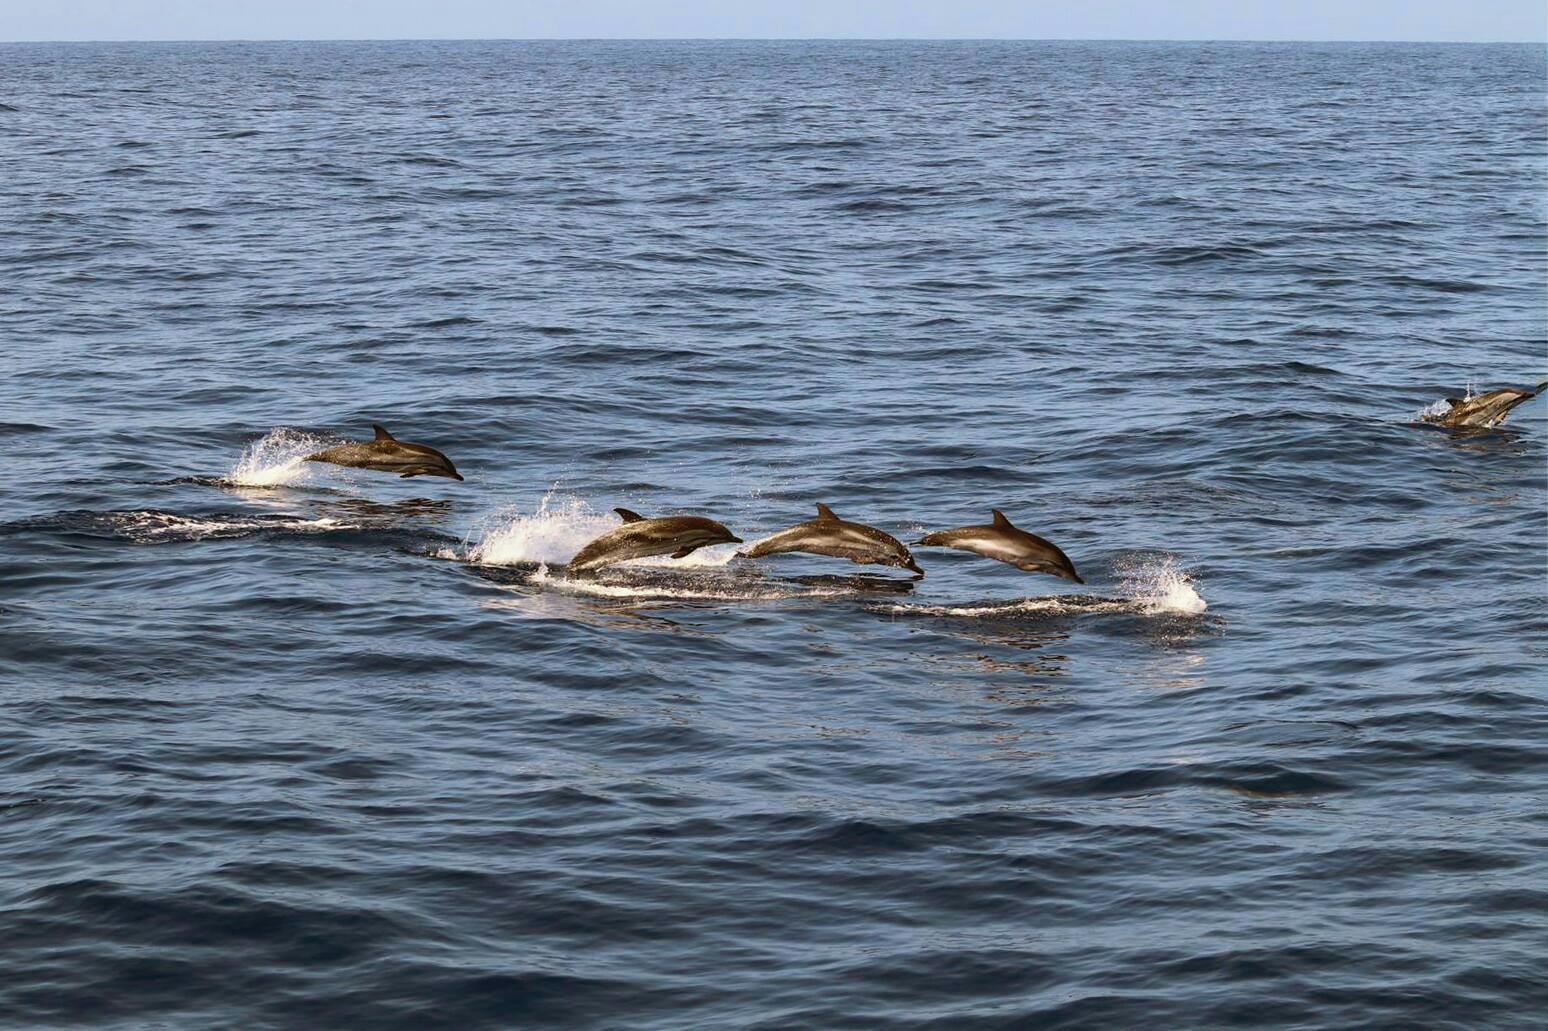 La Palma Dolphin & Whale Watching Cruise Ticket